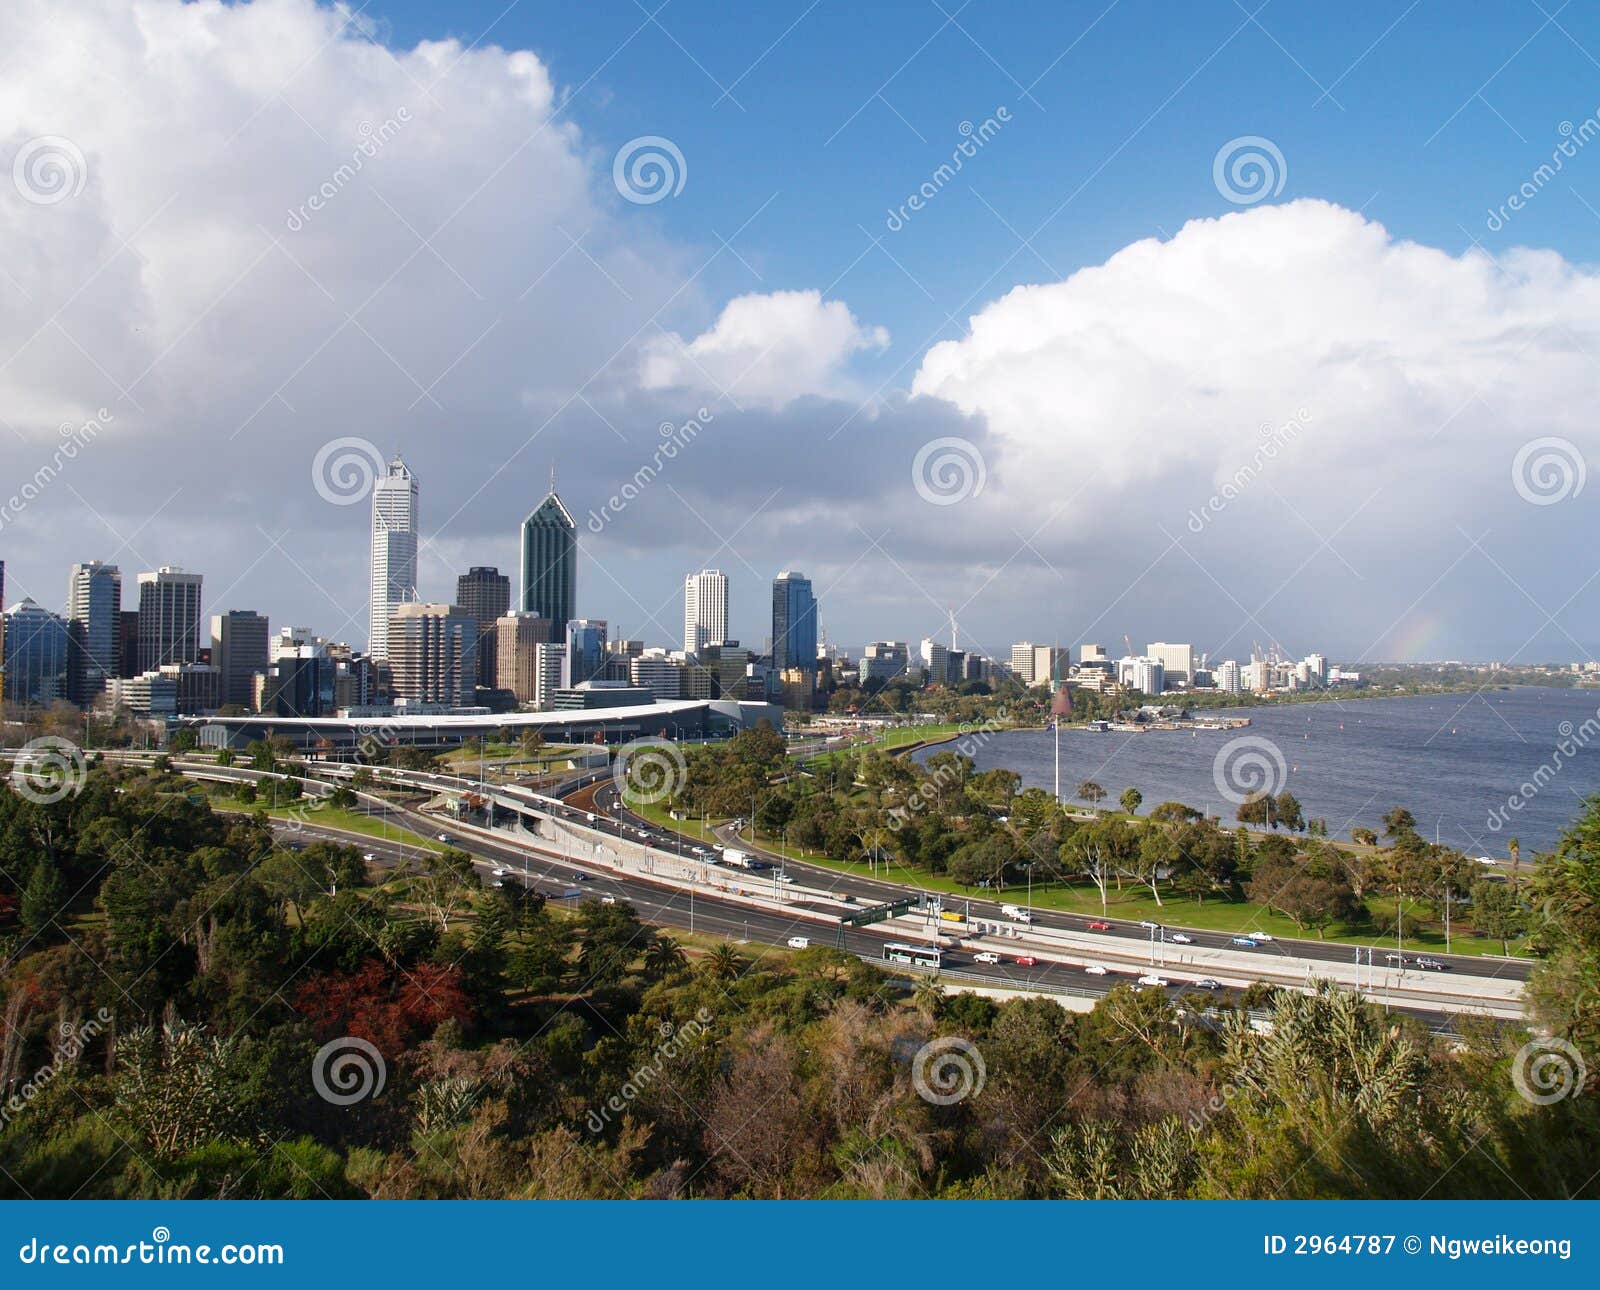 Royalty Free Stock Photography: Perth City Waterfront Skyline